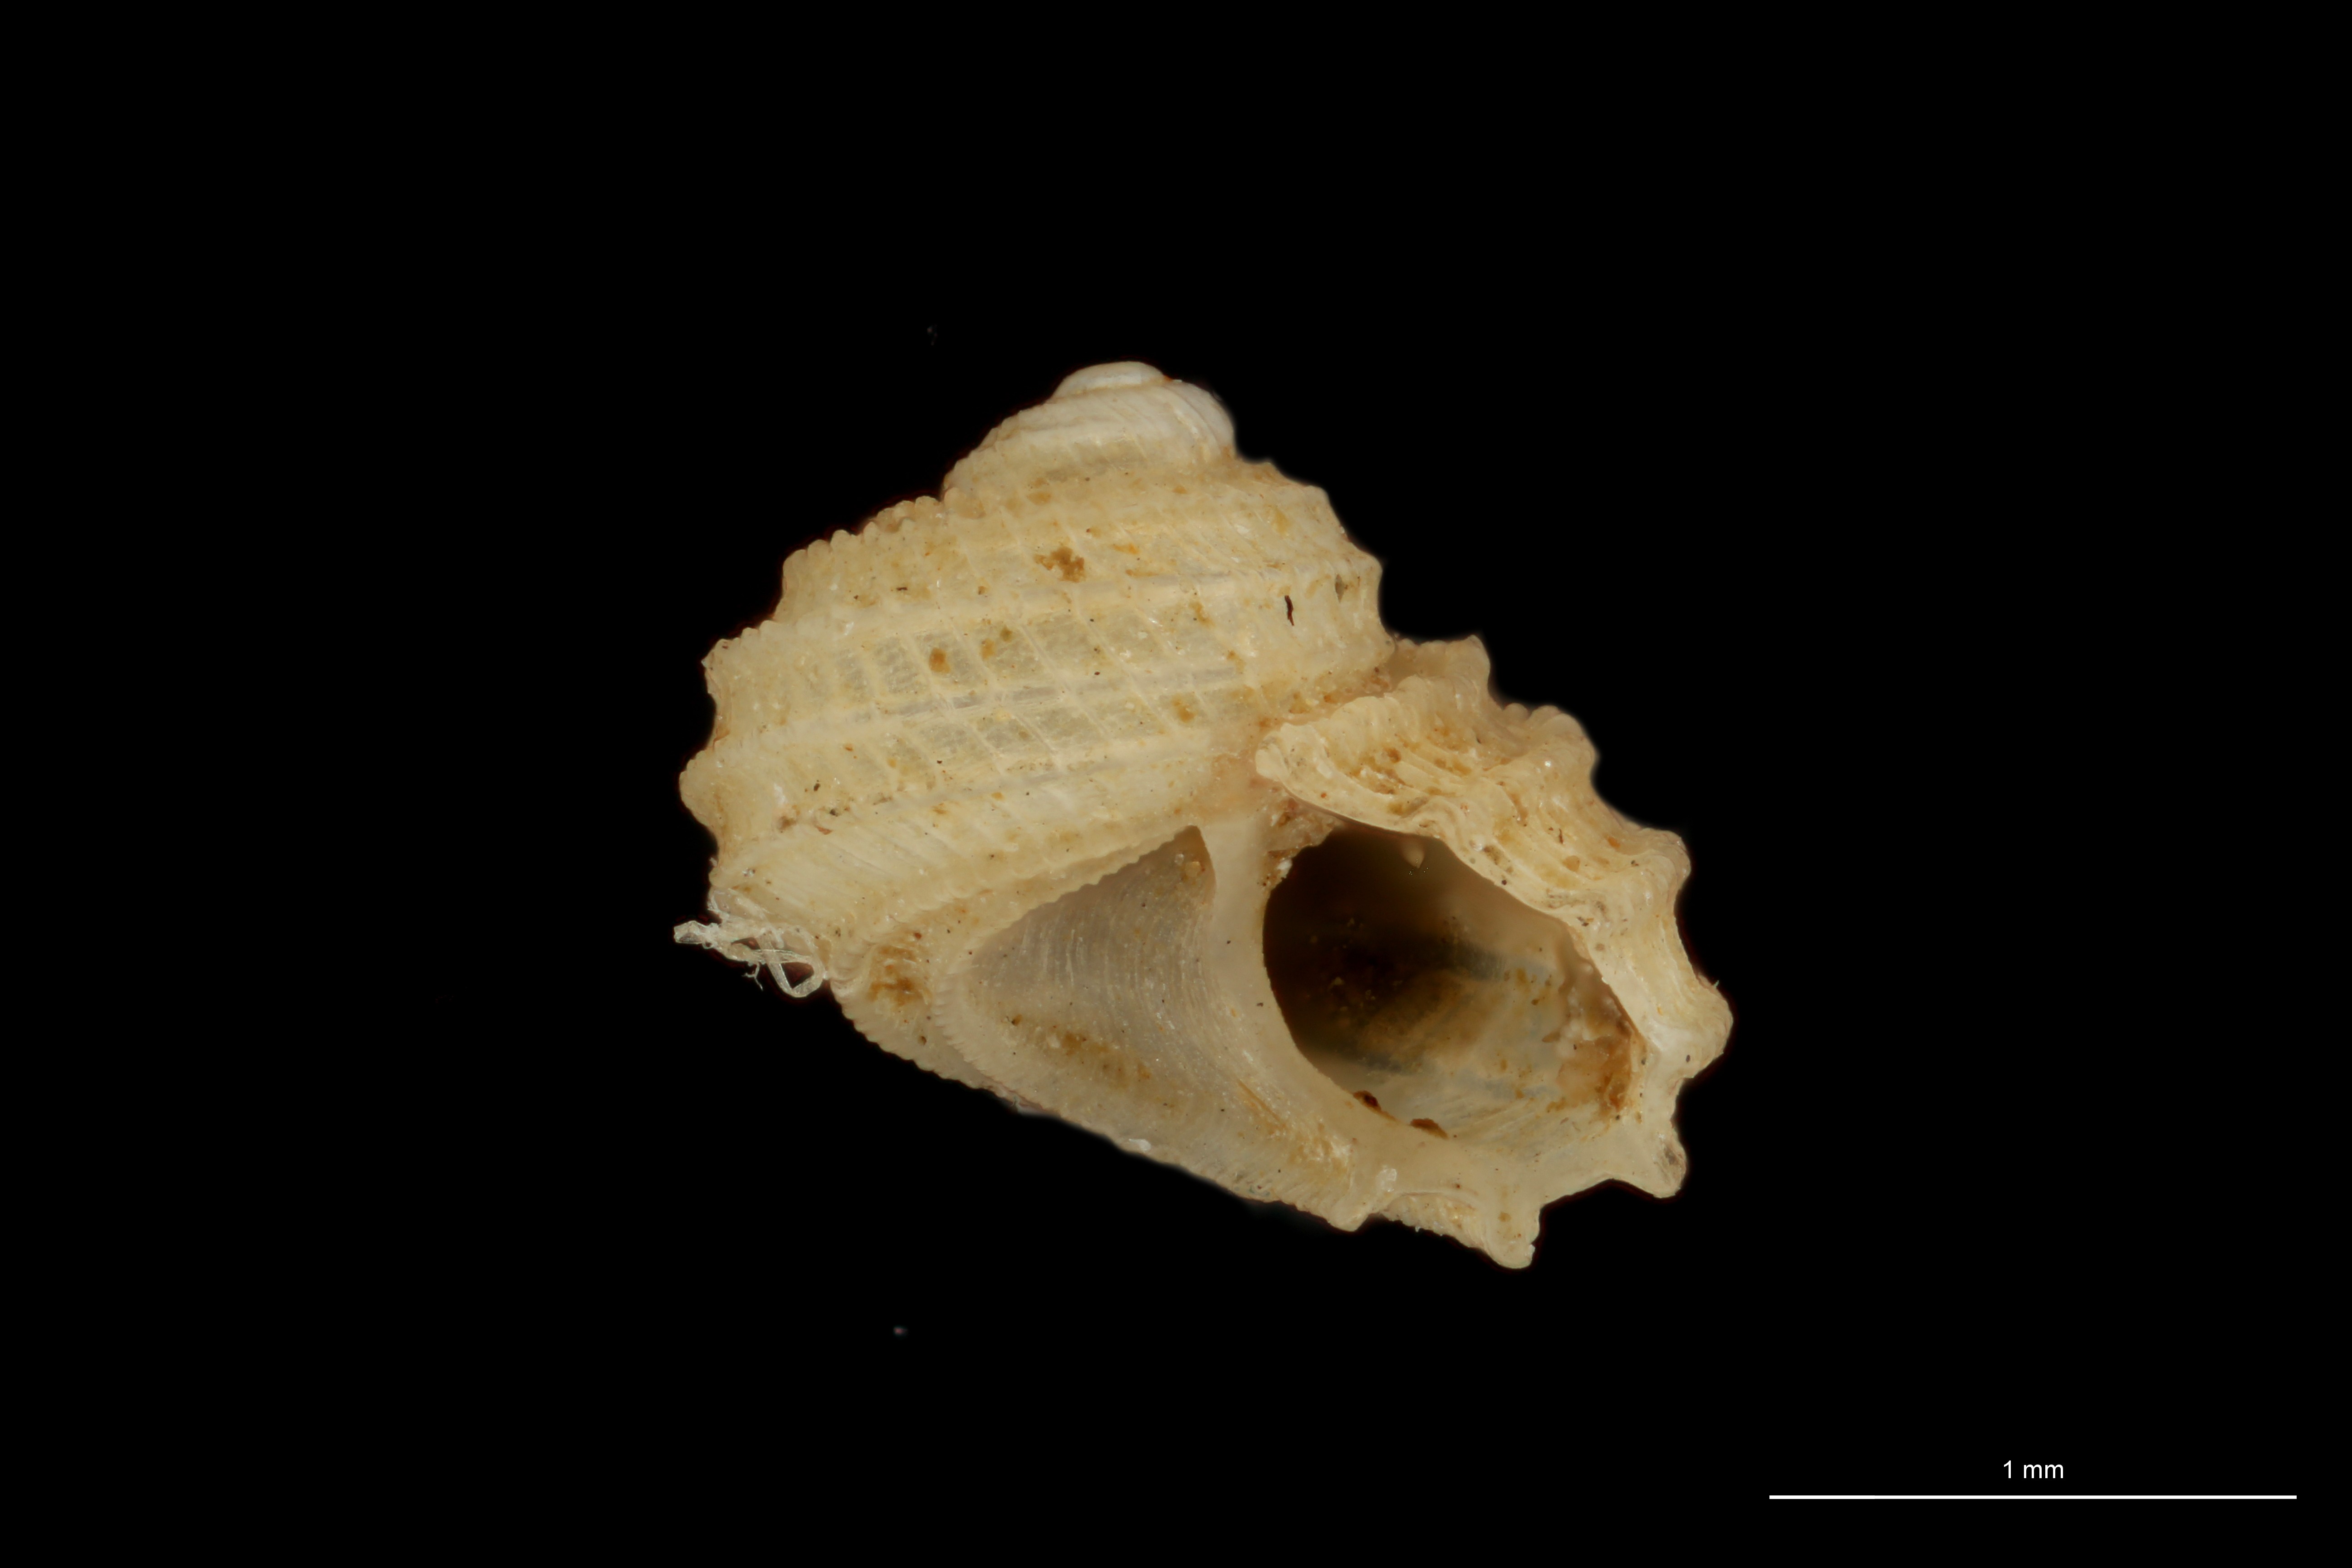 BE-RBINS-INV HOLOTYPE MT 85 Adeorbis jullieni LATERAL ZS DMap.jpg